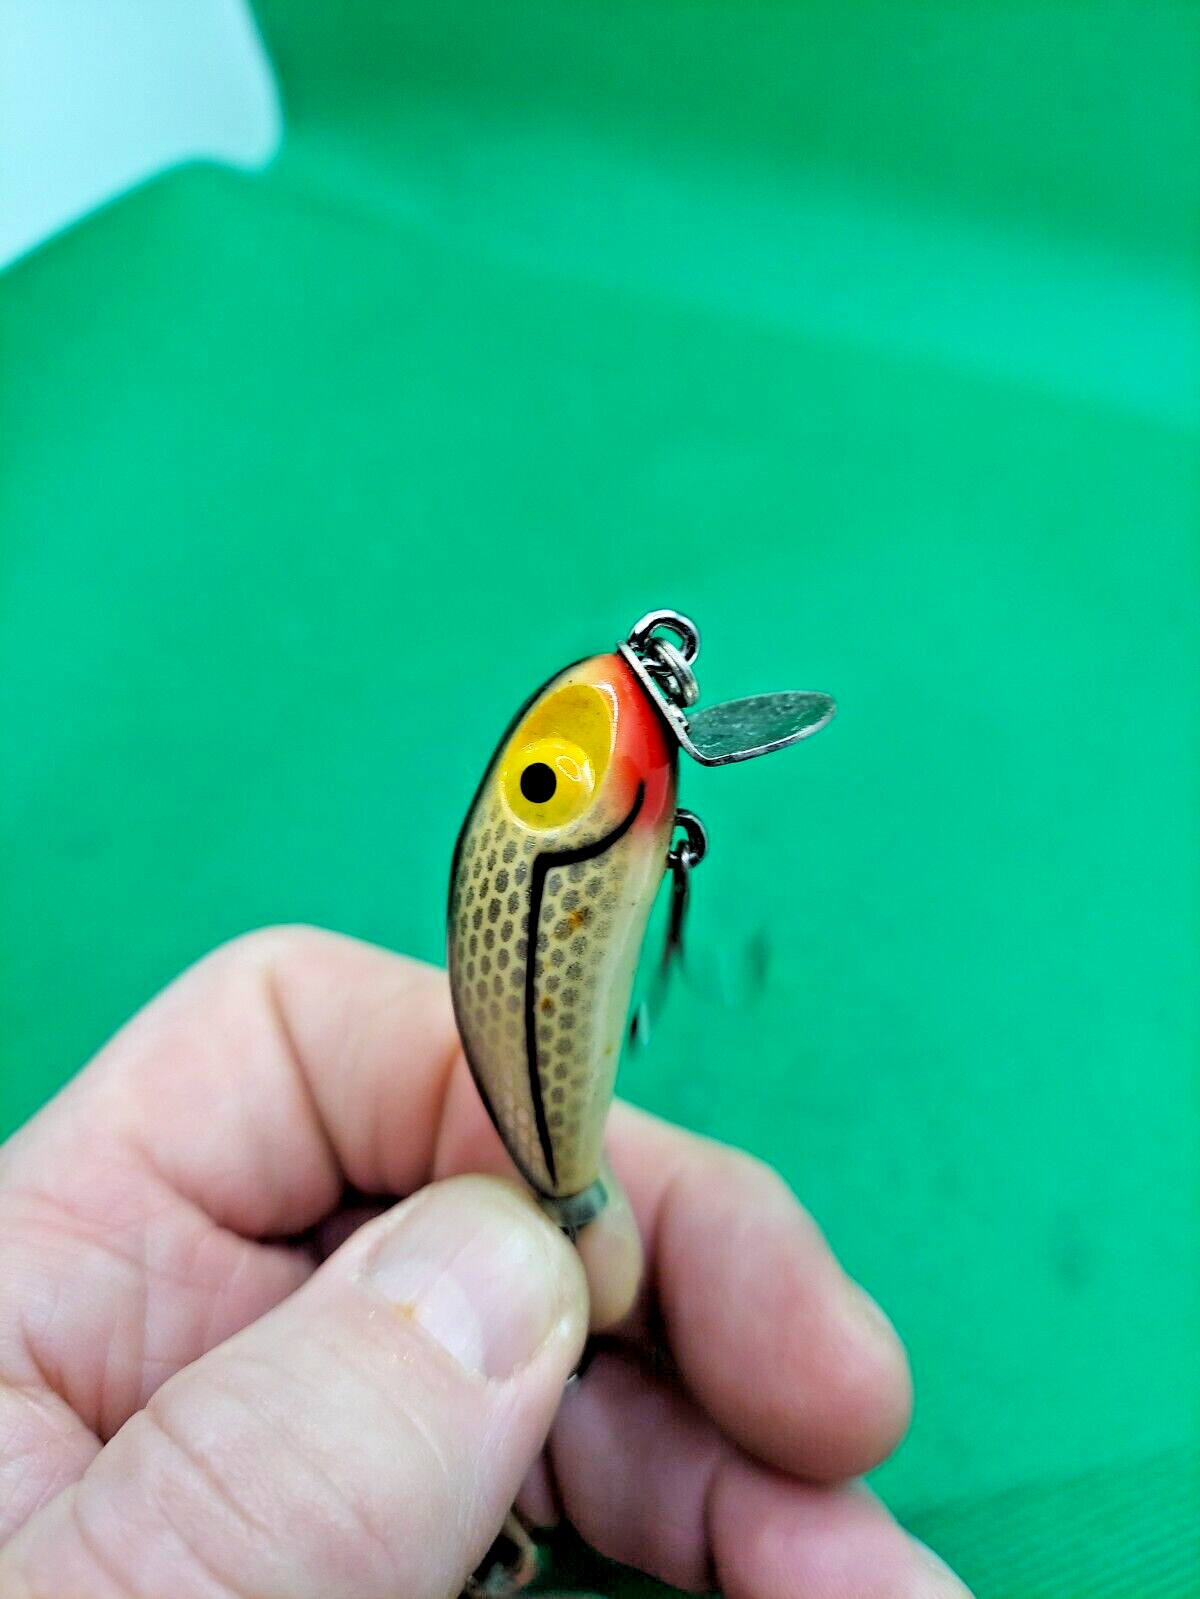 Vintage fishing lure Miracle minnow multi-colored.